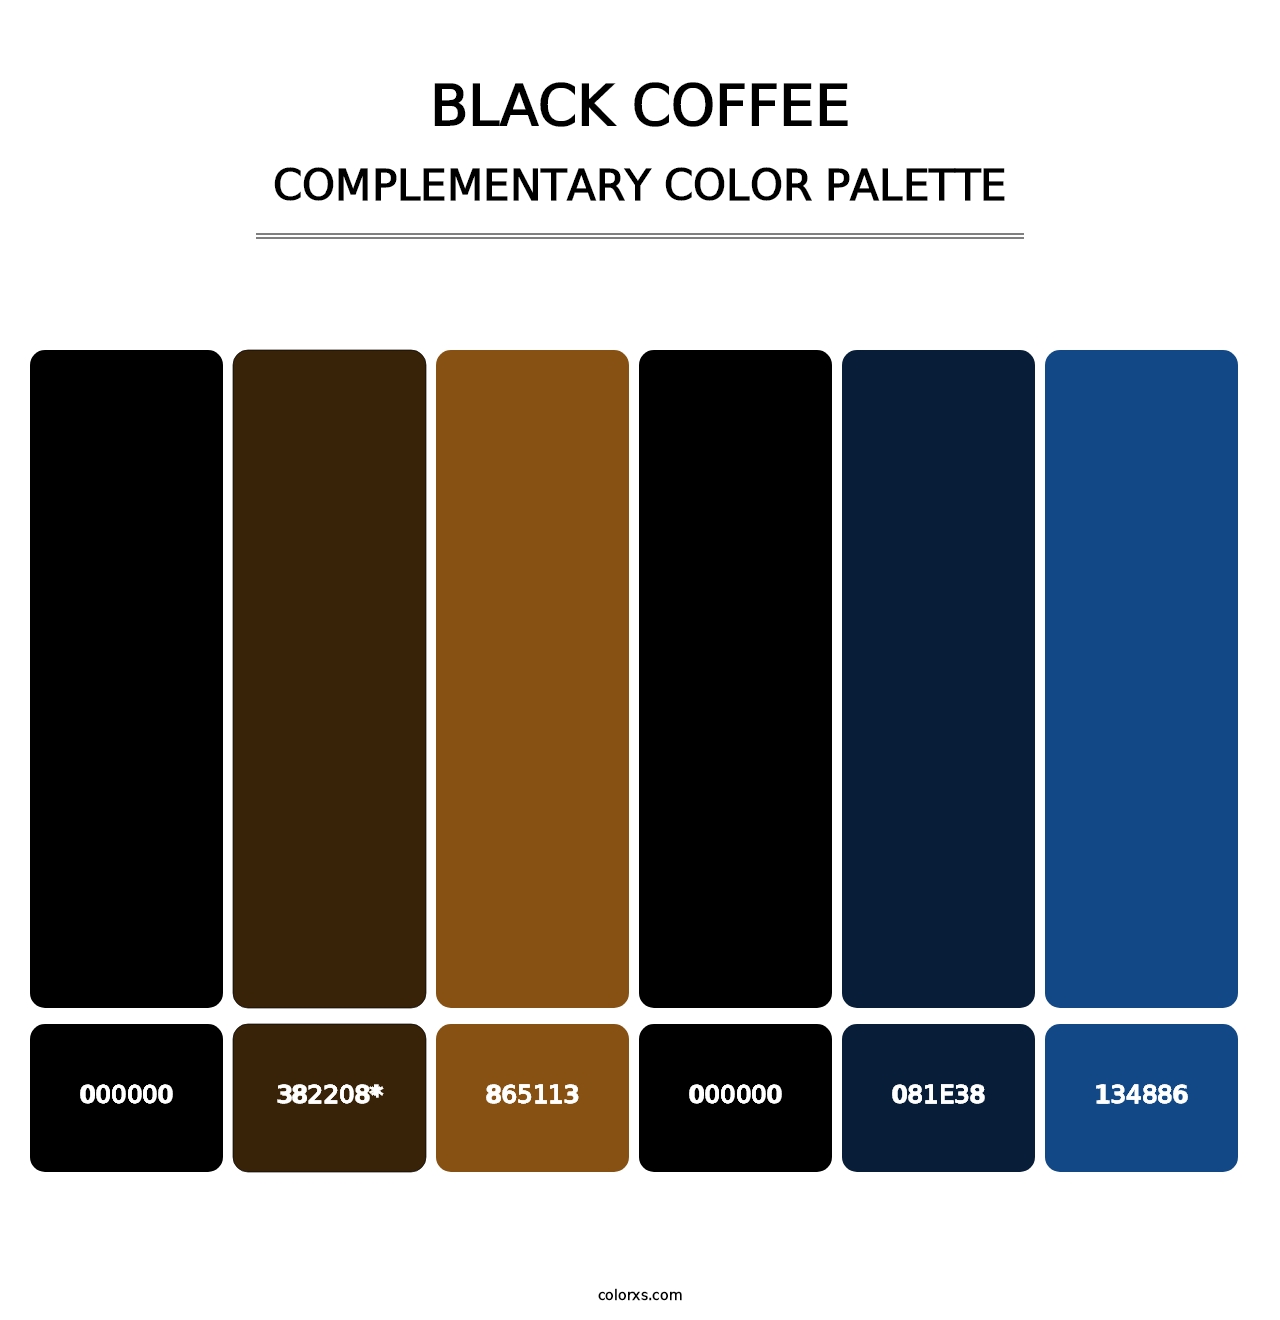 Black Coffee - Complementary Color Palette